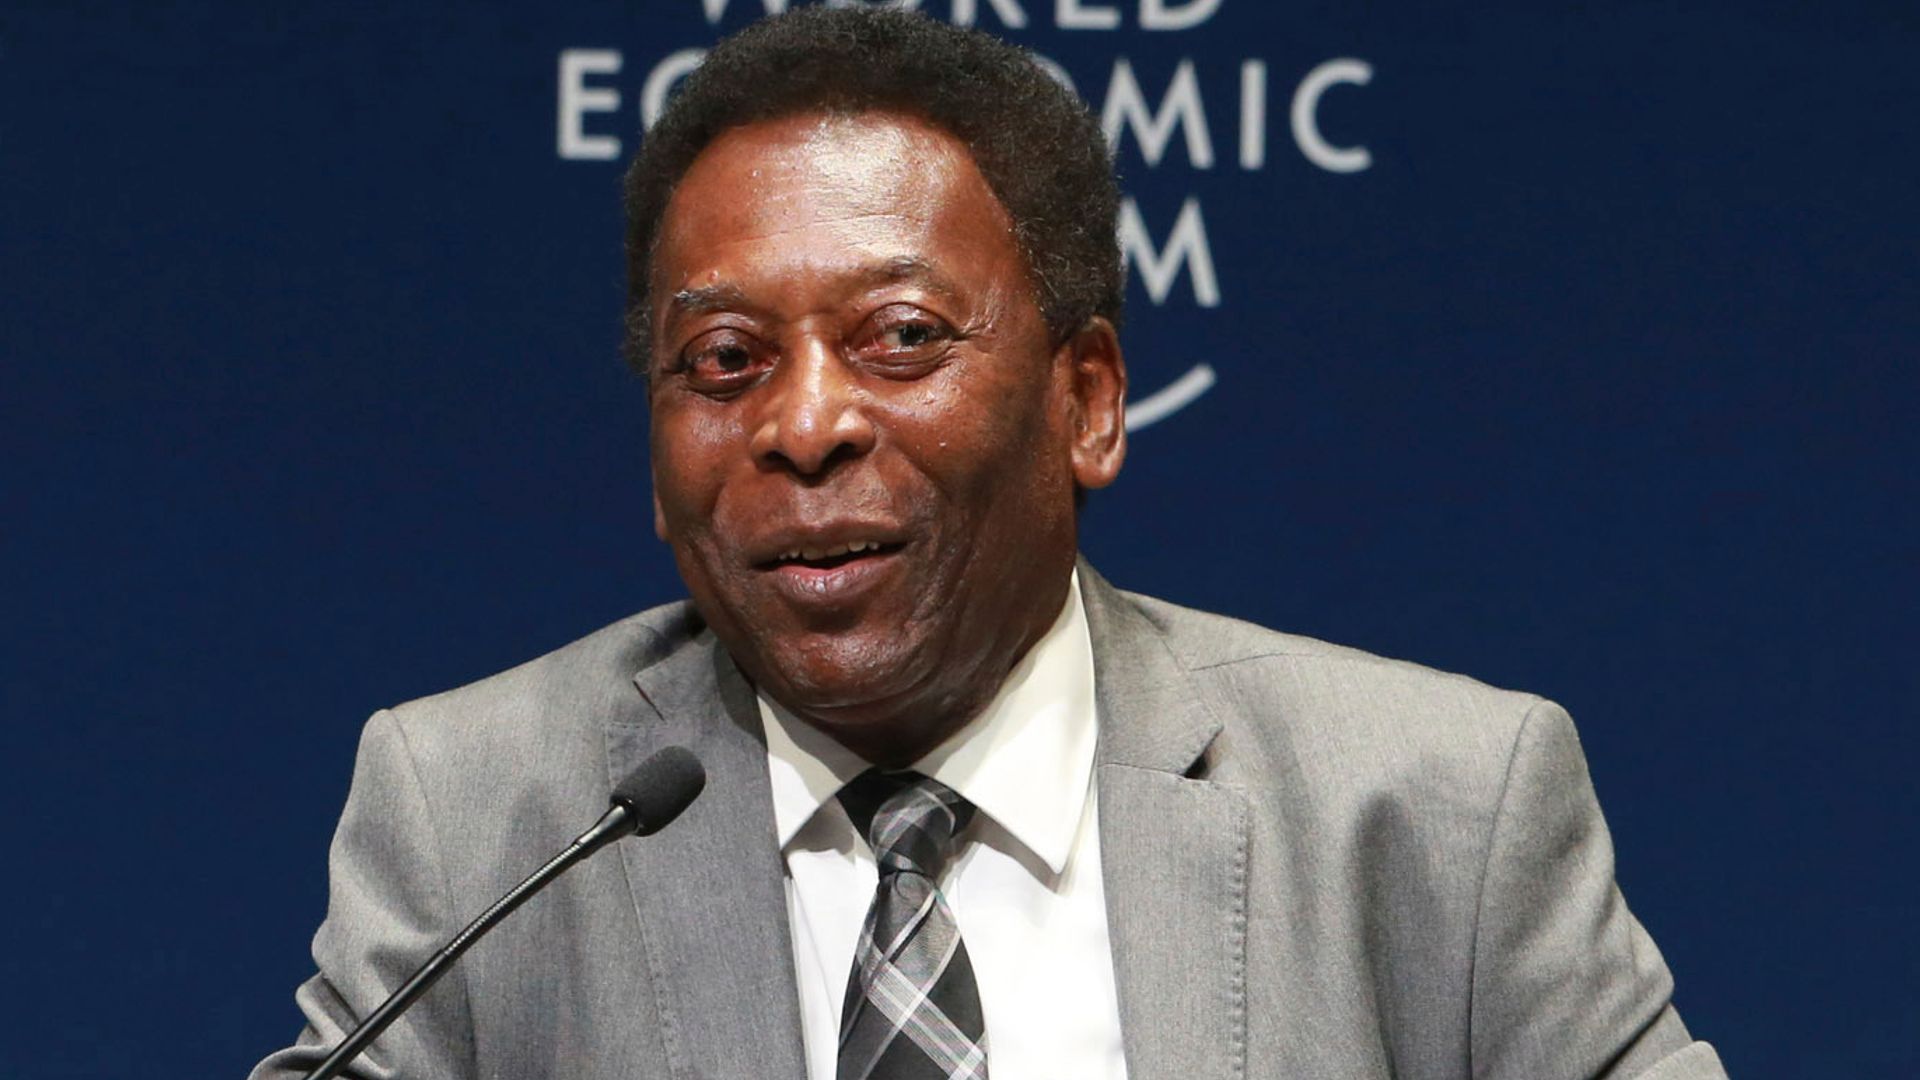 Pele 'punching the air' after being discharged from hospital